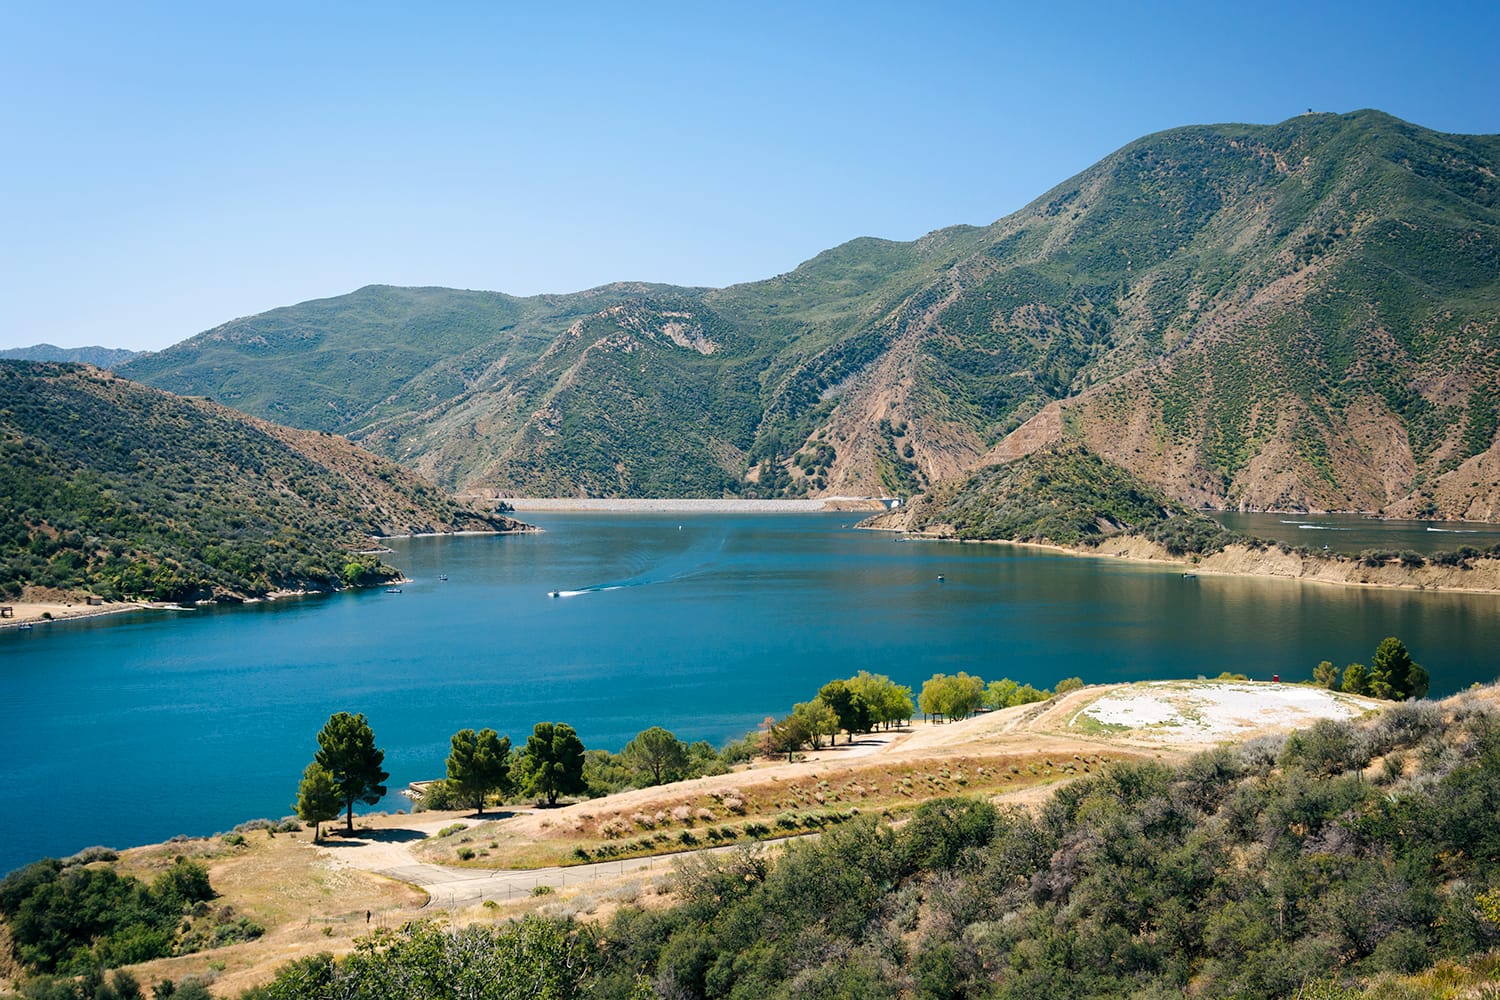 View of Pyramid Lake, in Angeles National Forest, California USA